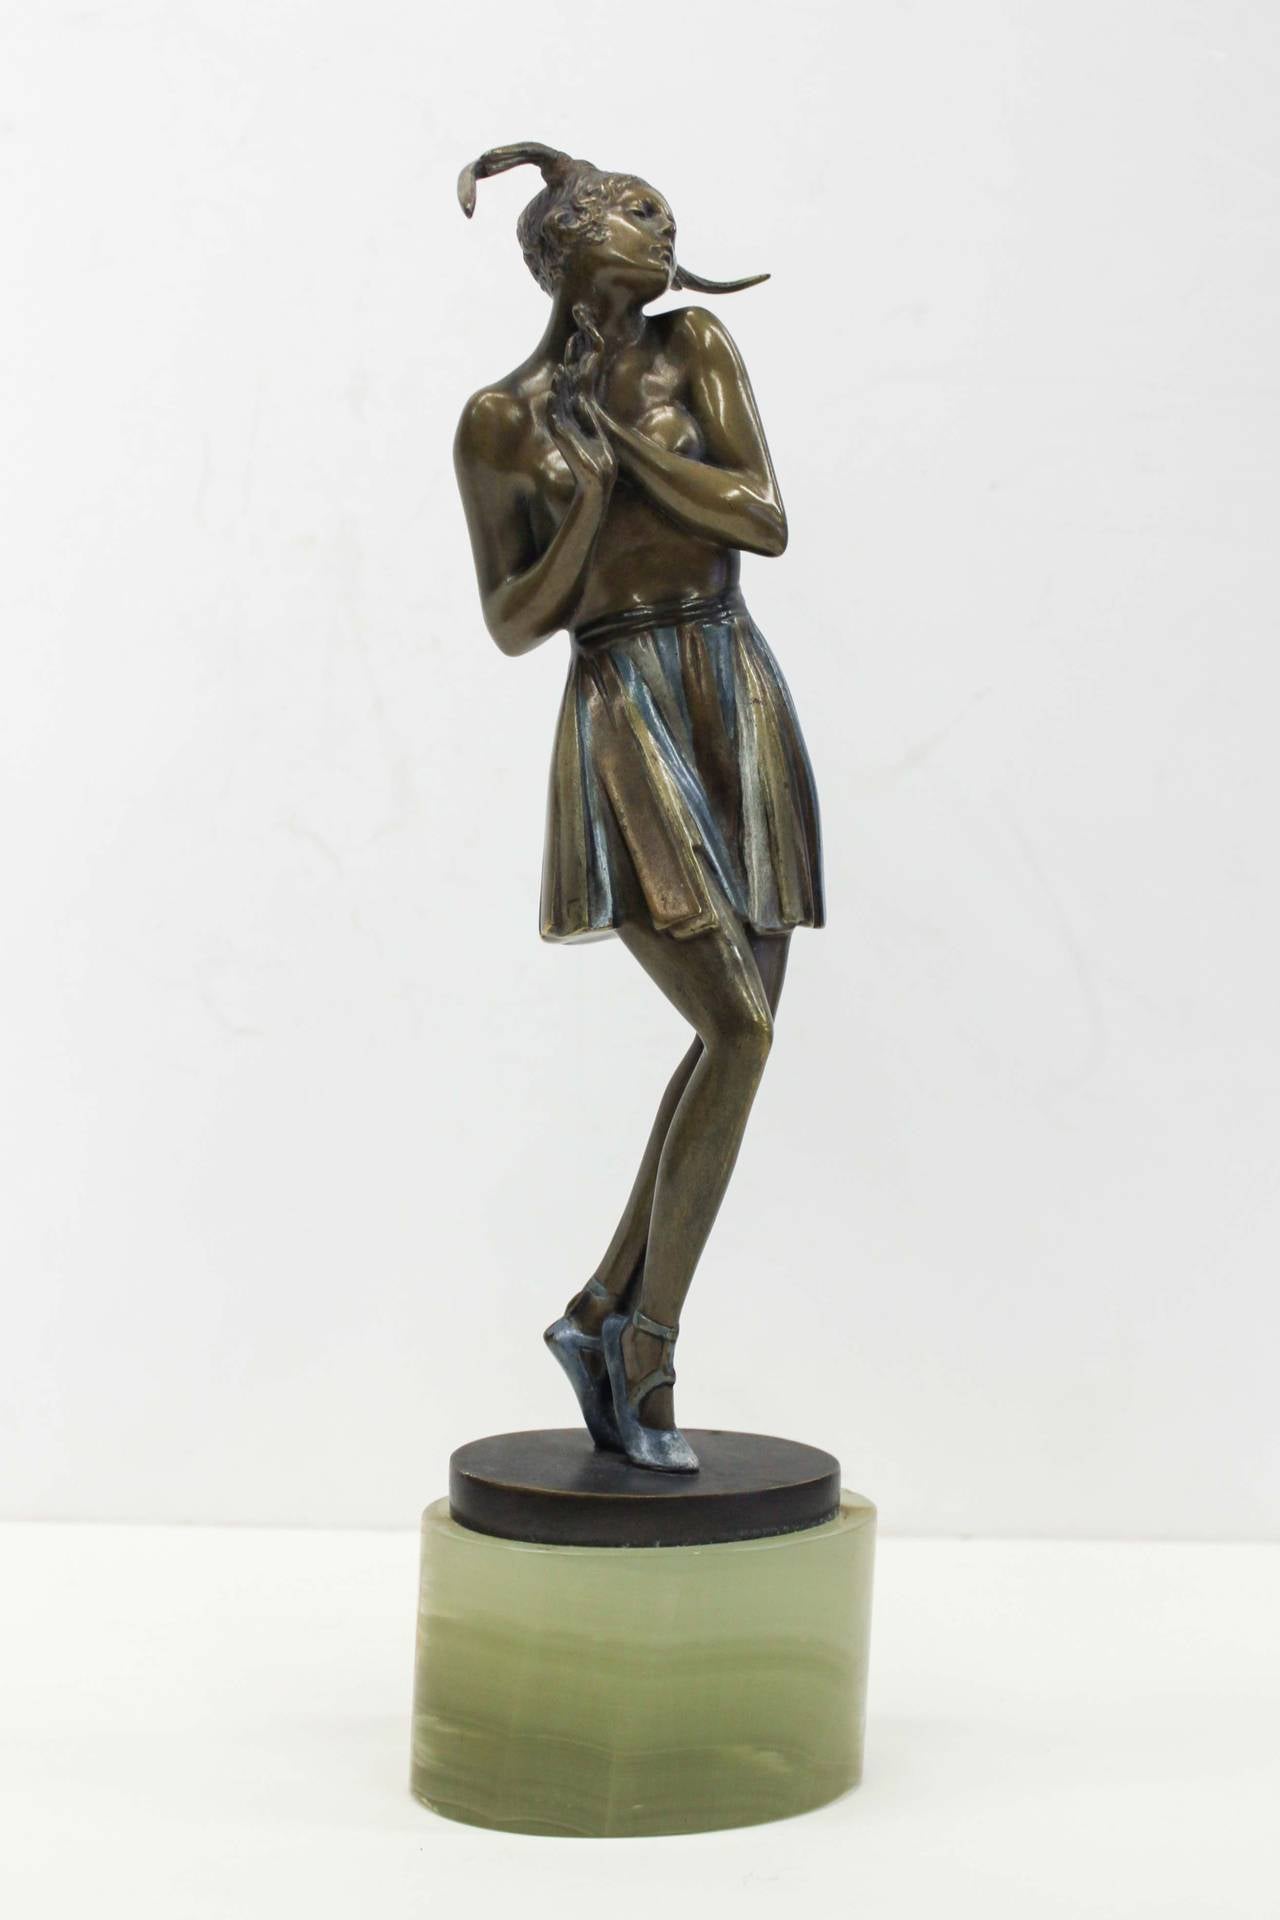 A beautifully rendered Art Deco bronze entitled 'Tanzendes Madchan' by Bruno Zach (1891-1945). Delicate and provocative, this piece portrays a dancer posing during a performance wearing only a skirt and head-piece. The subject was possibly inspired